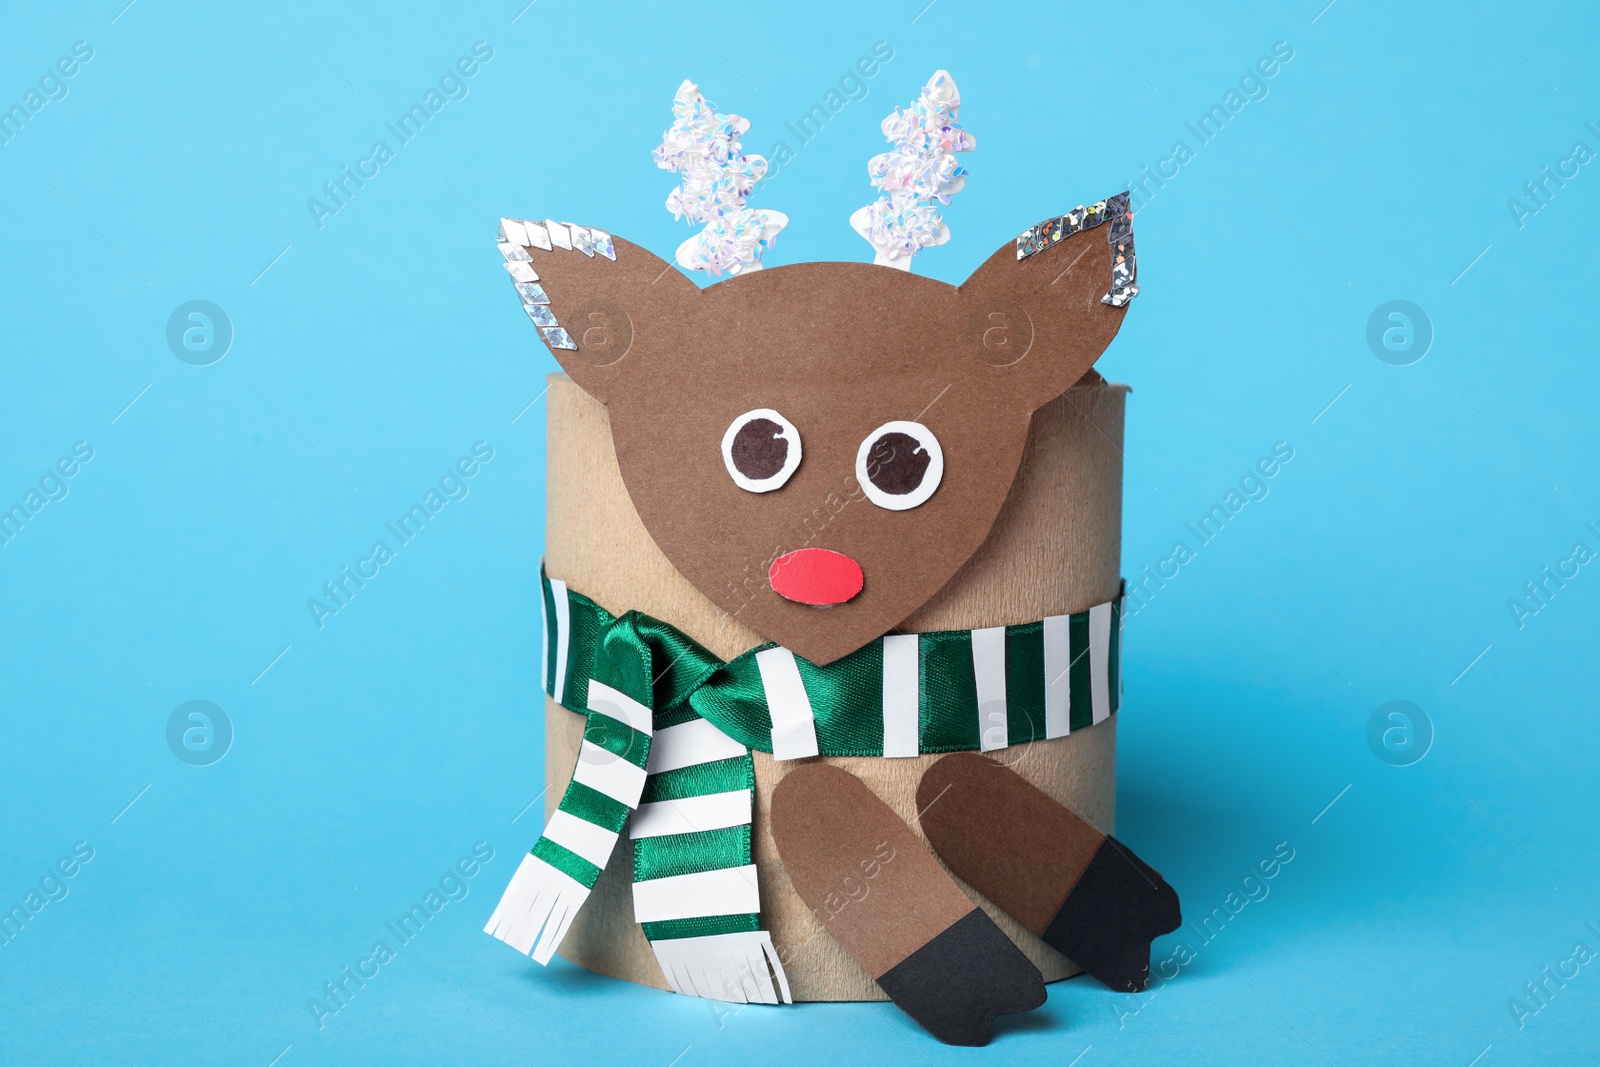 Photo of Toy deer made of toilet paper roll on light blue background